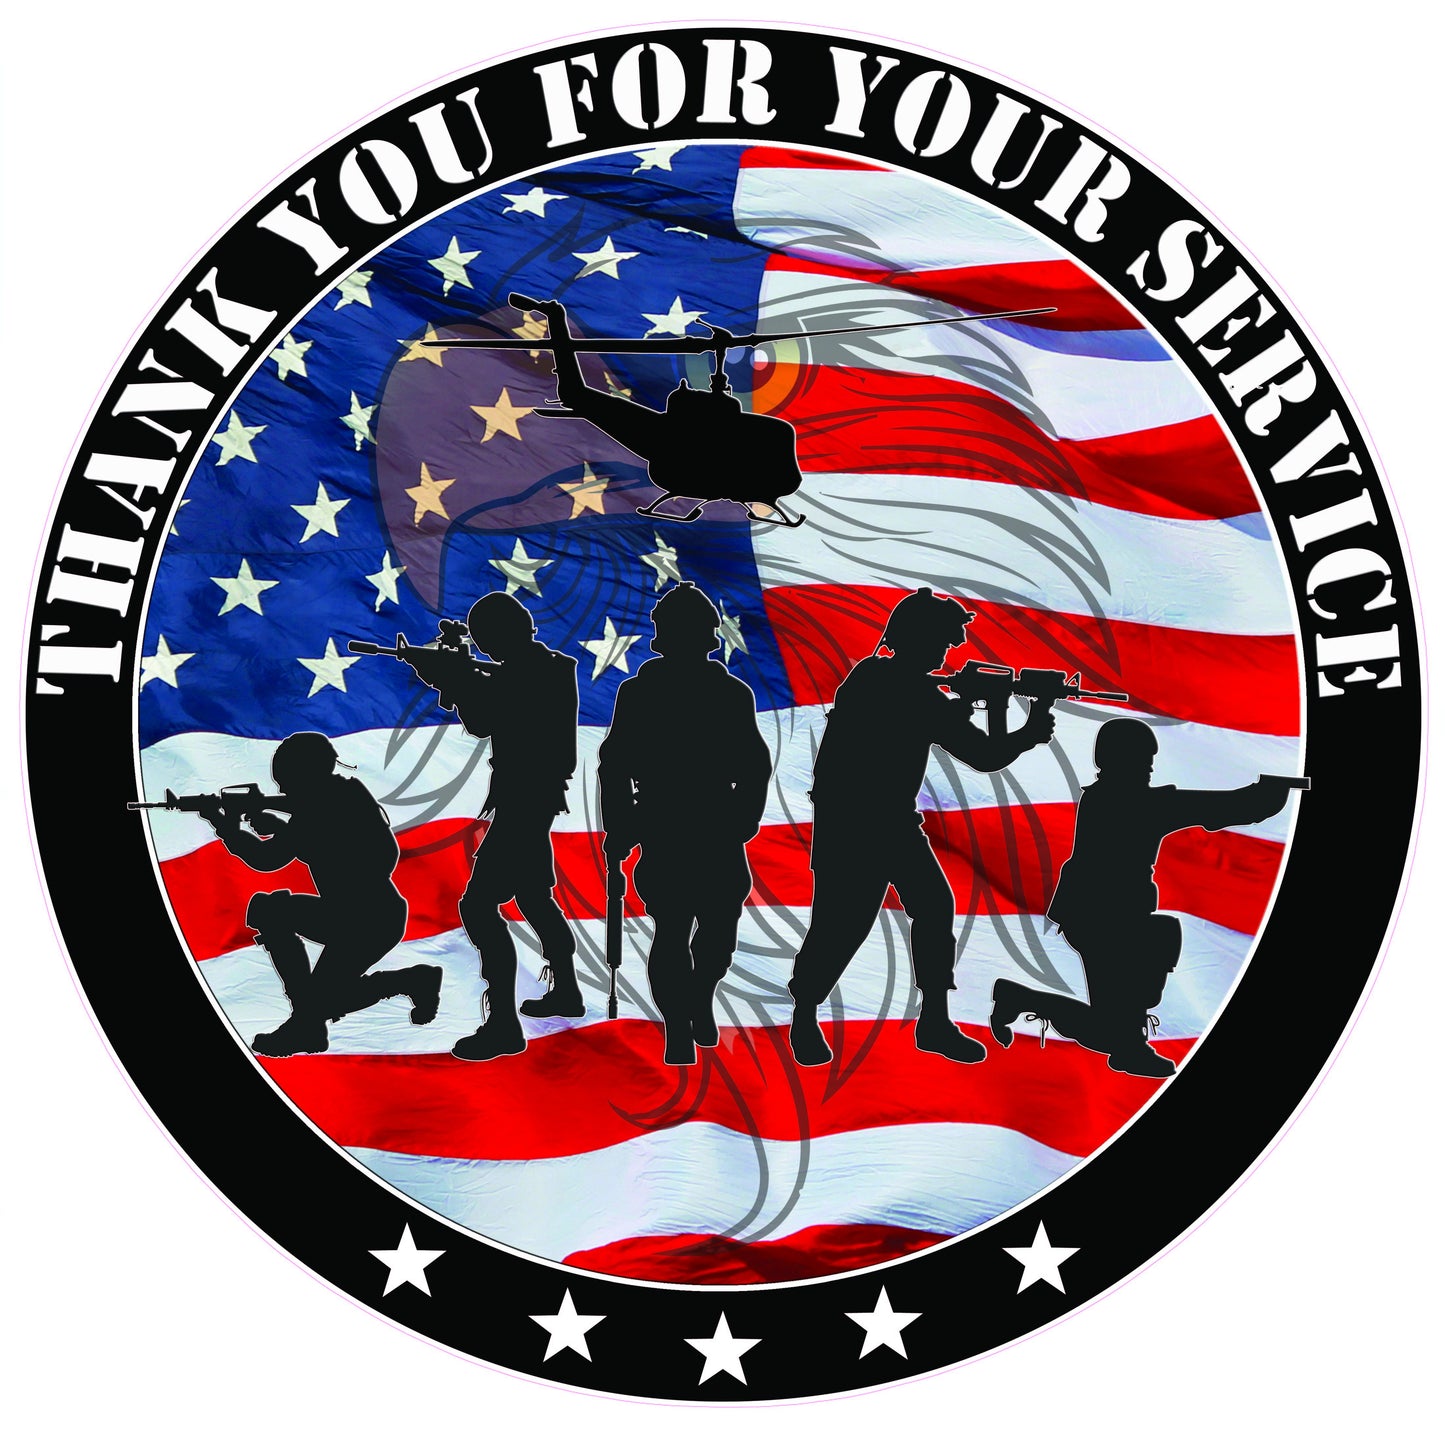 Military - Thank you for your Service Decal - American Bald Eagle, American bald eagle decal, American eagle, American Eagle American Flag Decal, American flag, American flag eagle decals, American flag stickers, armed forces stickers, automotive decals, automotive stickers, bumper stickers, eagle decals, eagle stickers, Military and Veterans Decals, Military decals, military stickers, Patriotic stickers, Support Our Troops Decal, Thank you for your Service Decal, vehicle decals, Vehicle sticker